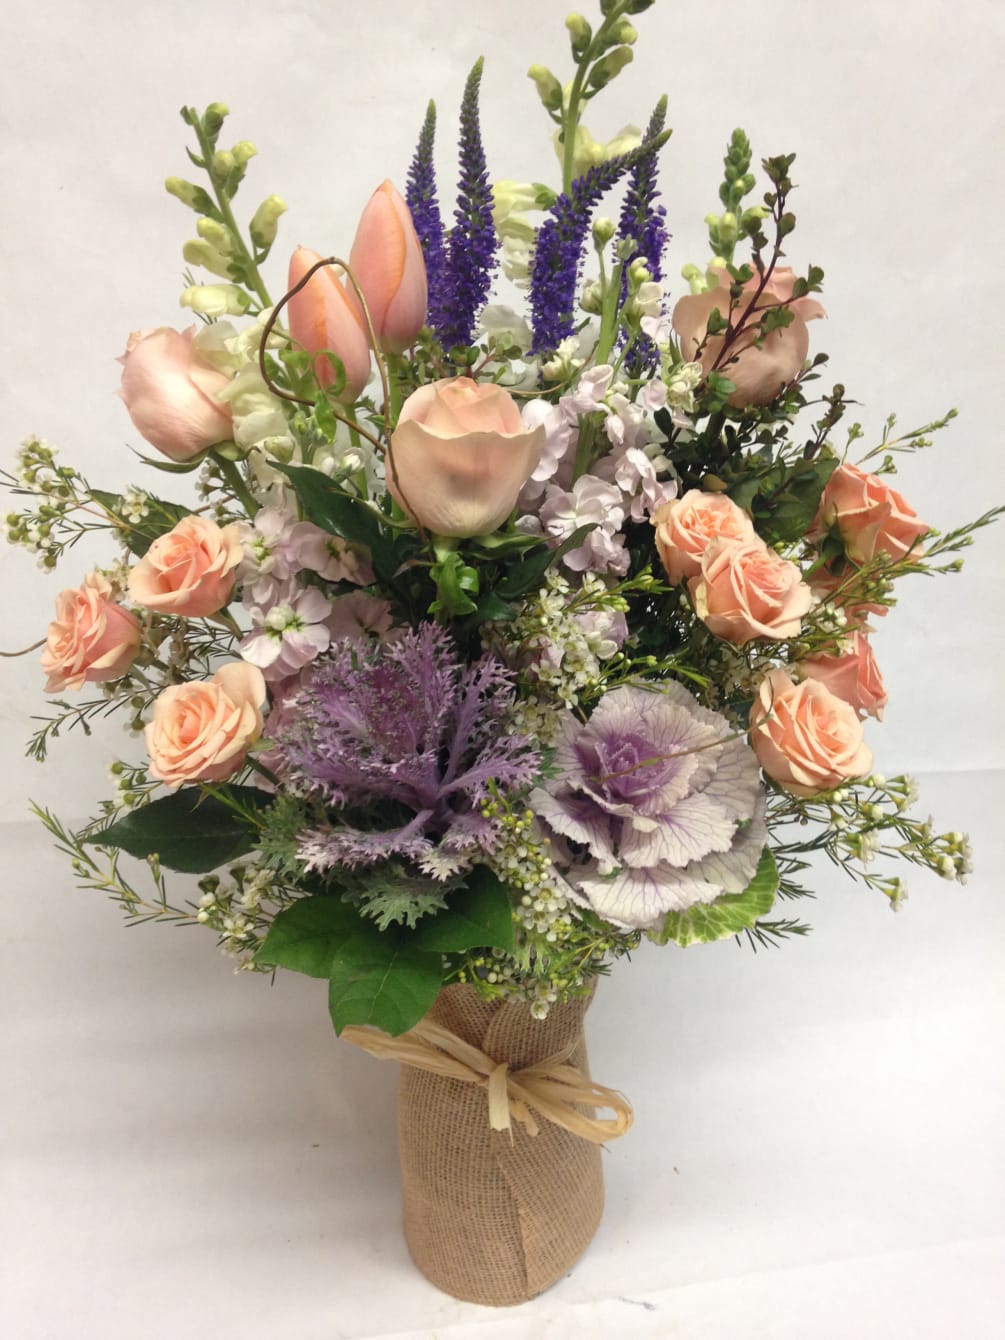 A muted and sophisticated arrangement featuring peach roses, stock, purple kale, and